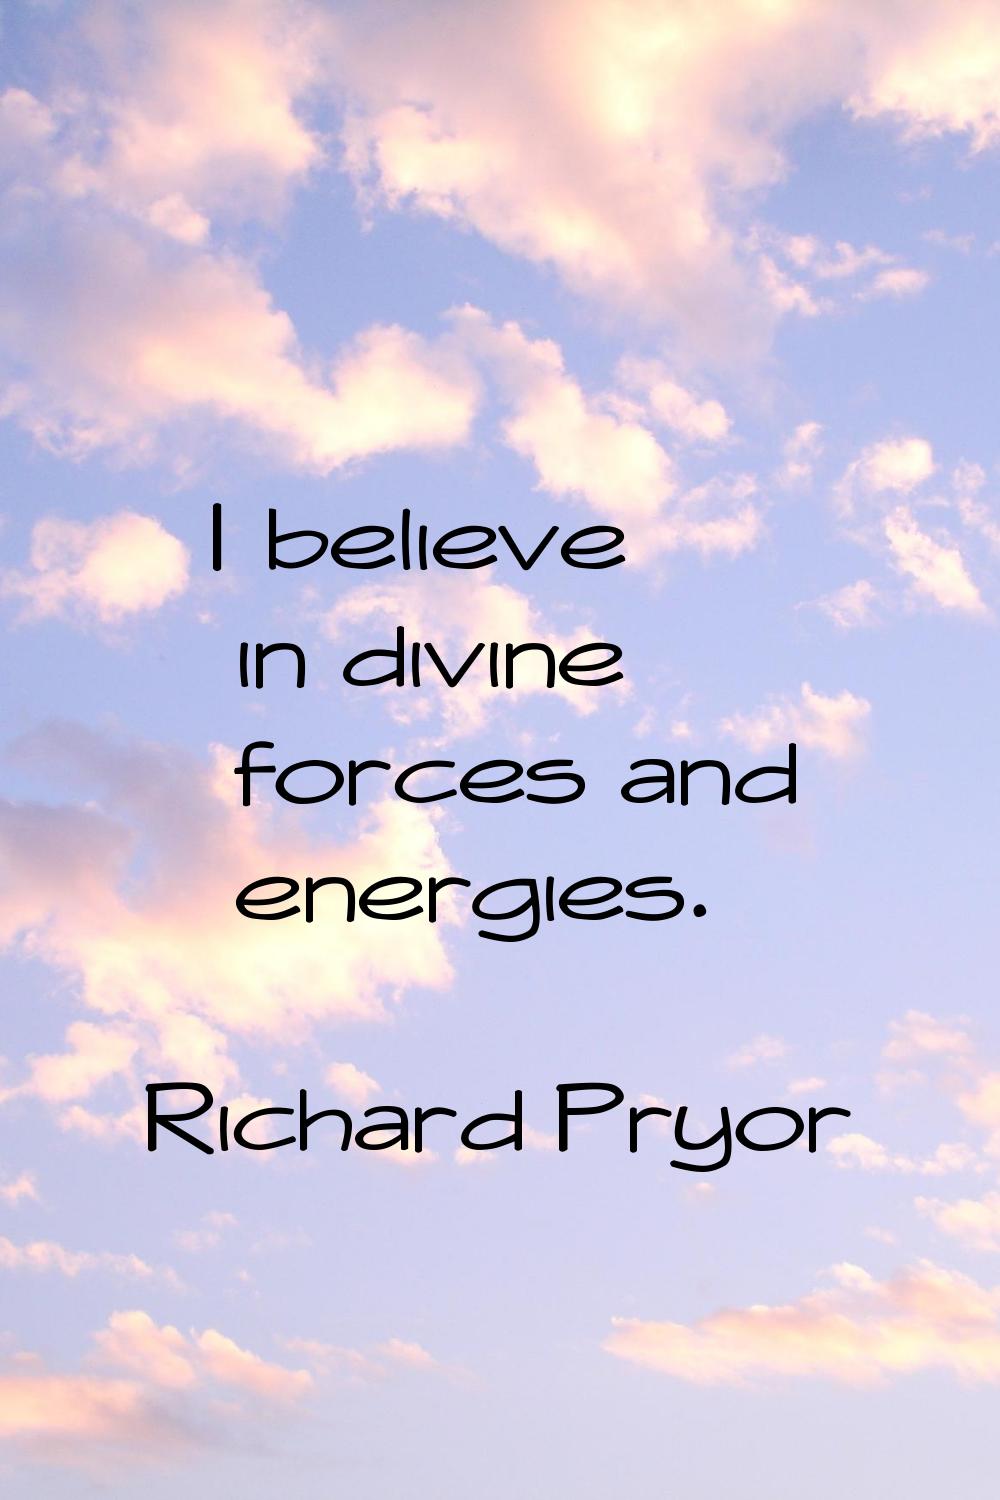 I believe in divine forces and energies.